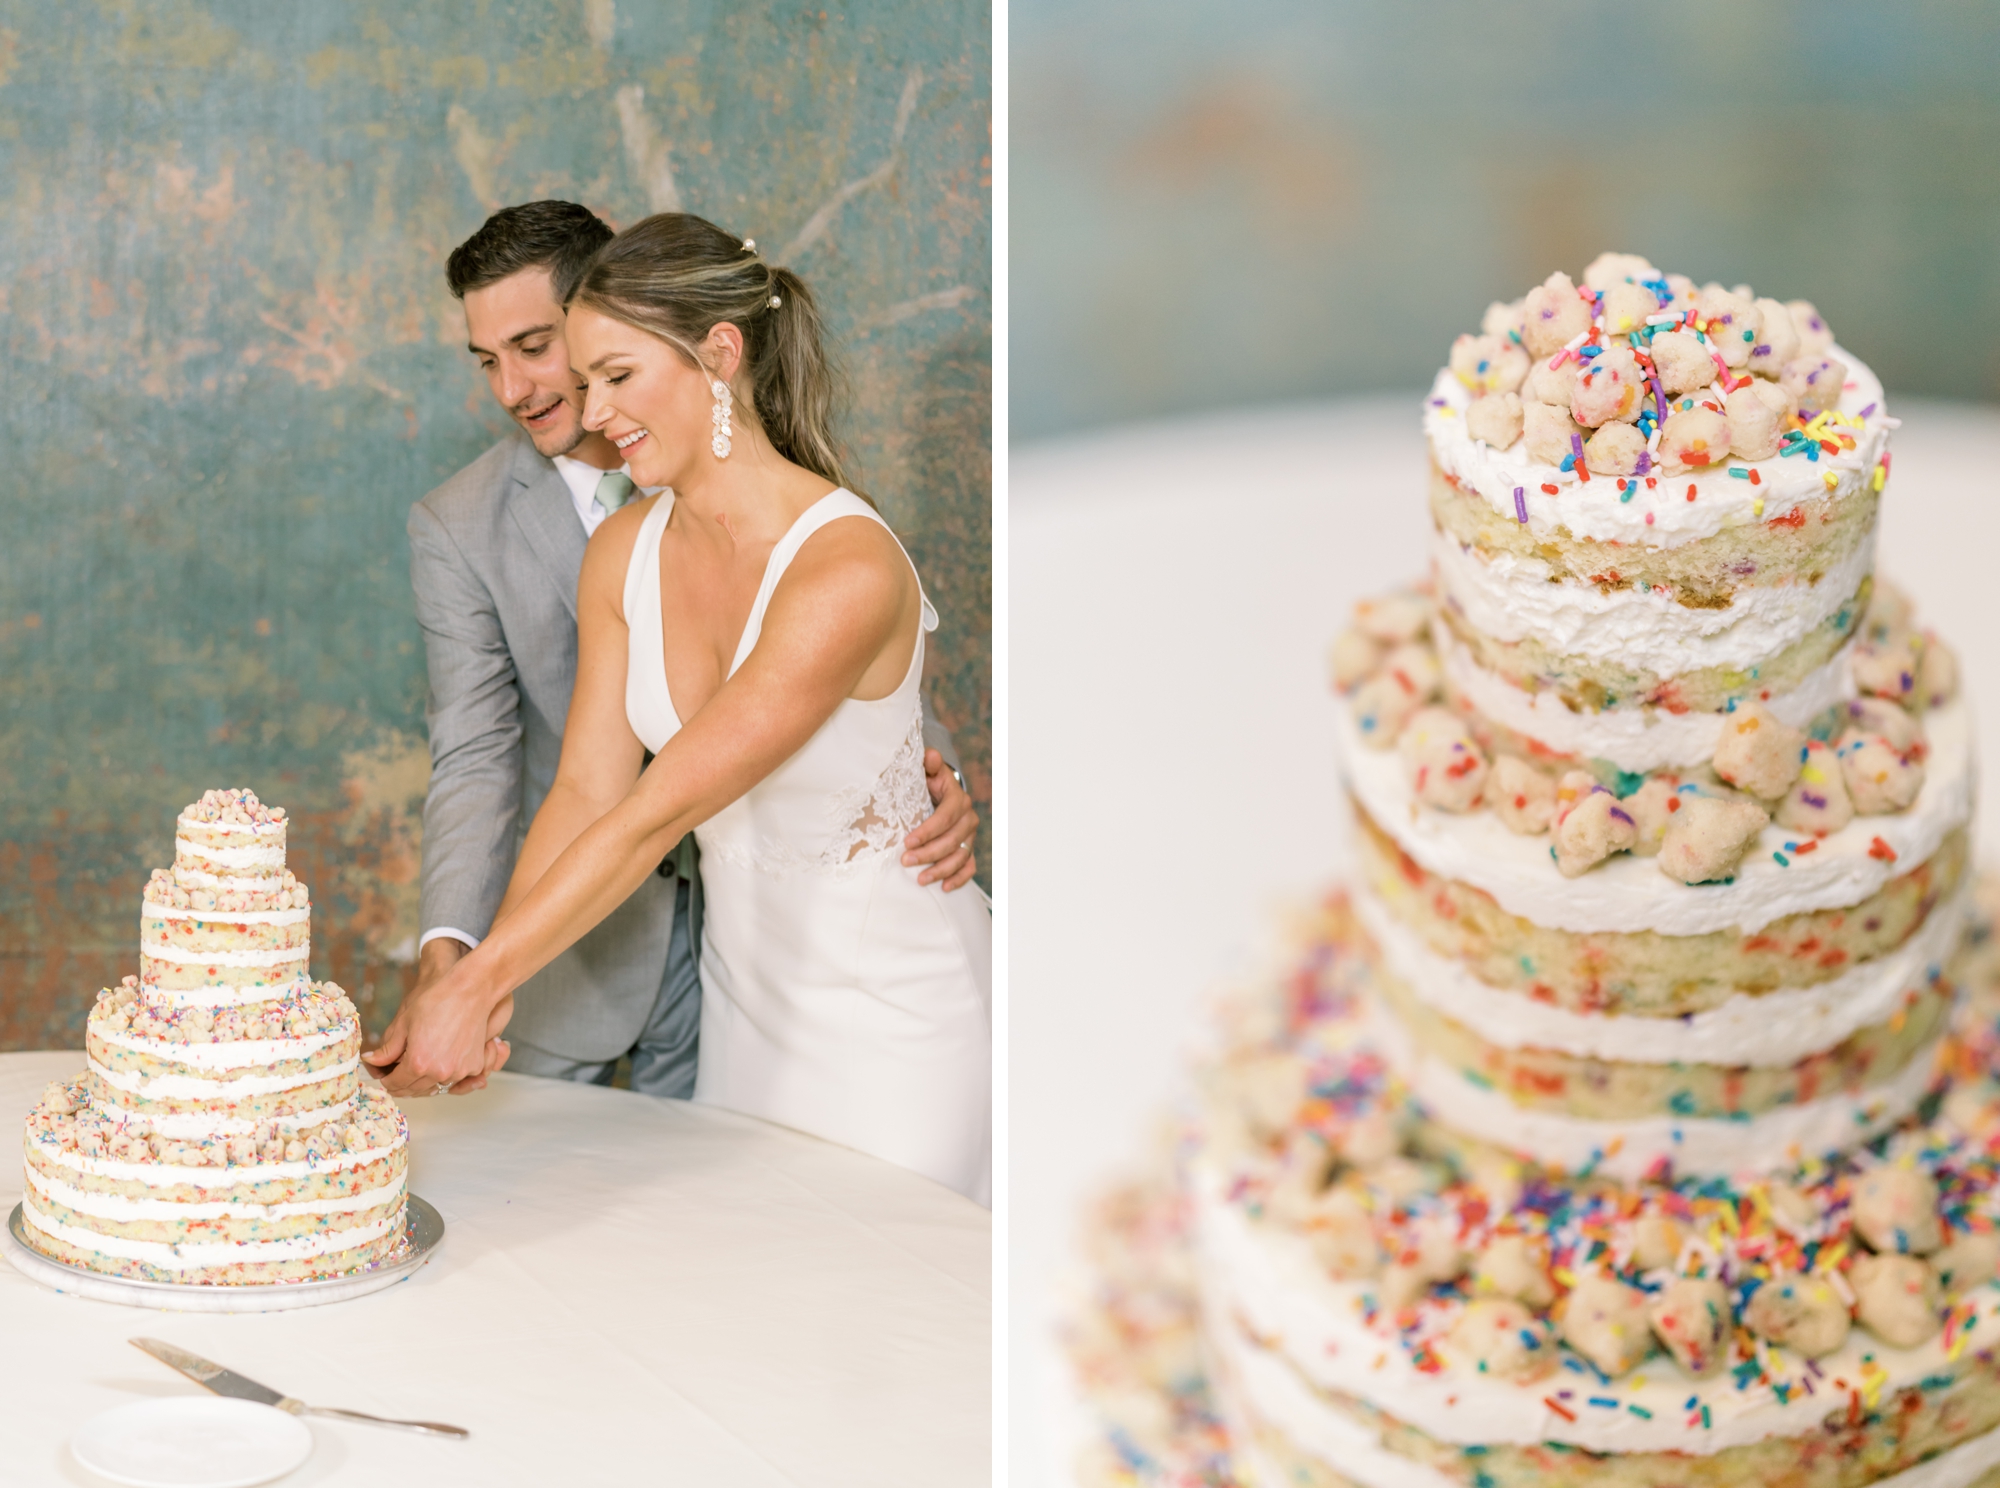 Photo of a couple cutting their wedding cake and a close up of the three-tier wedding cake